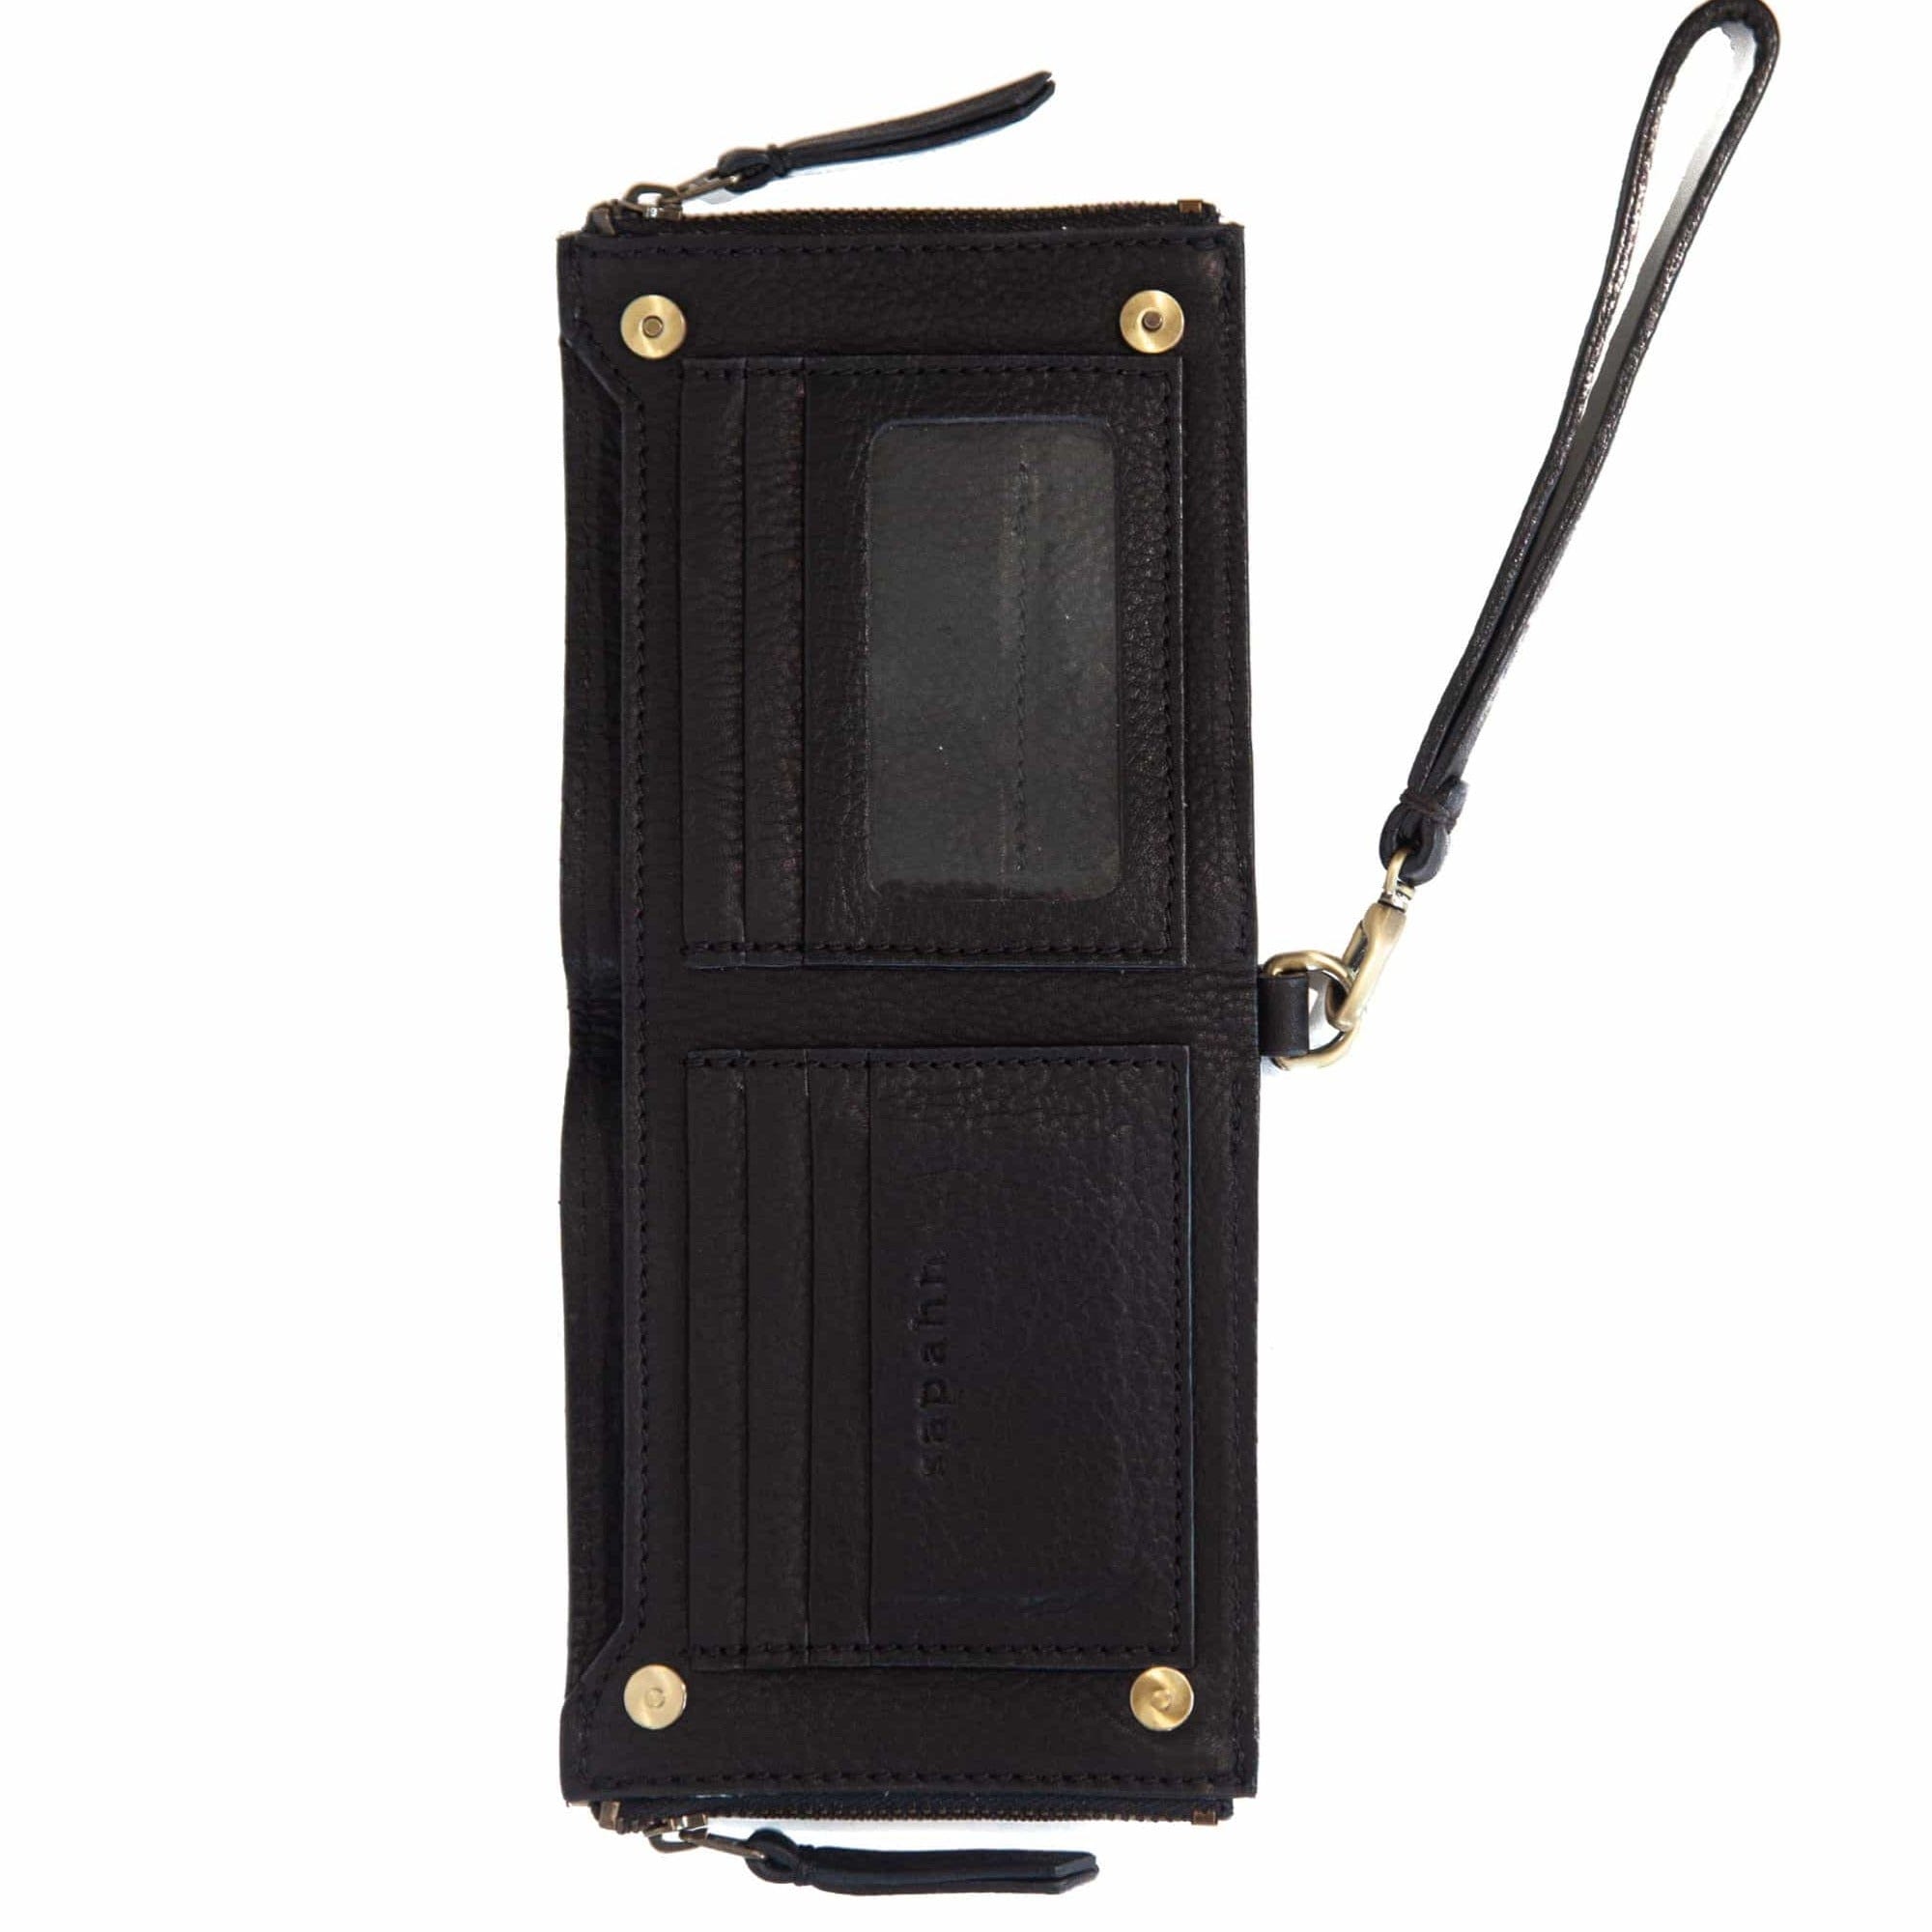 The Noelle billfold wristlet wallet in black raw leather has a strong snap closure.